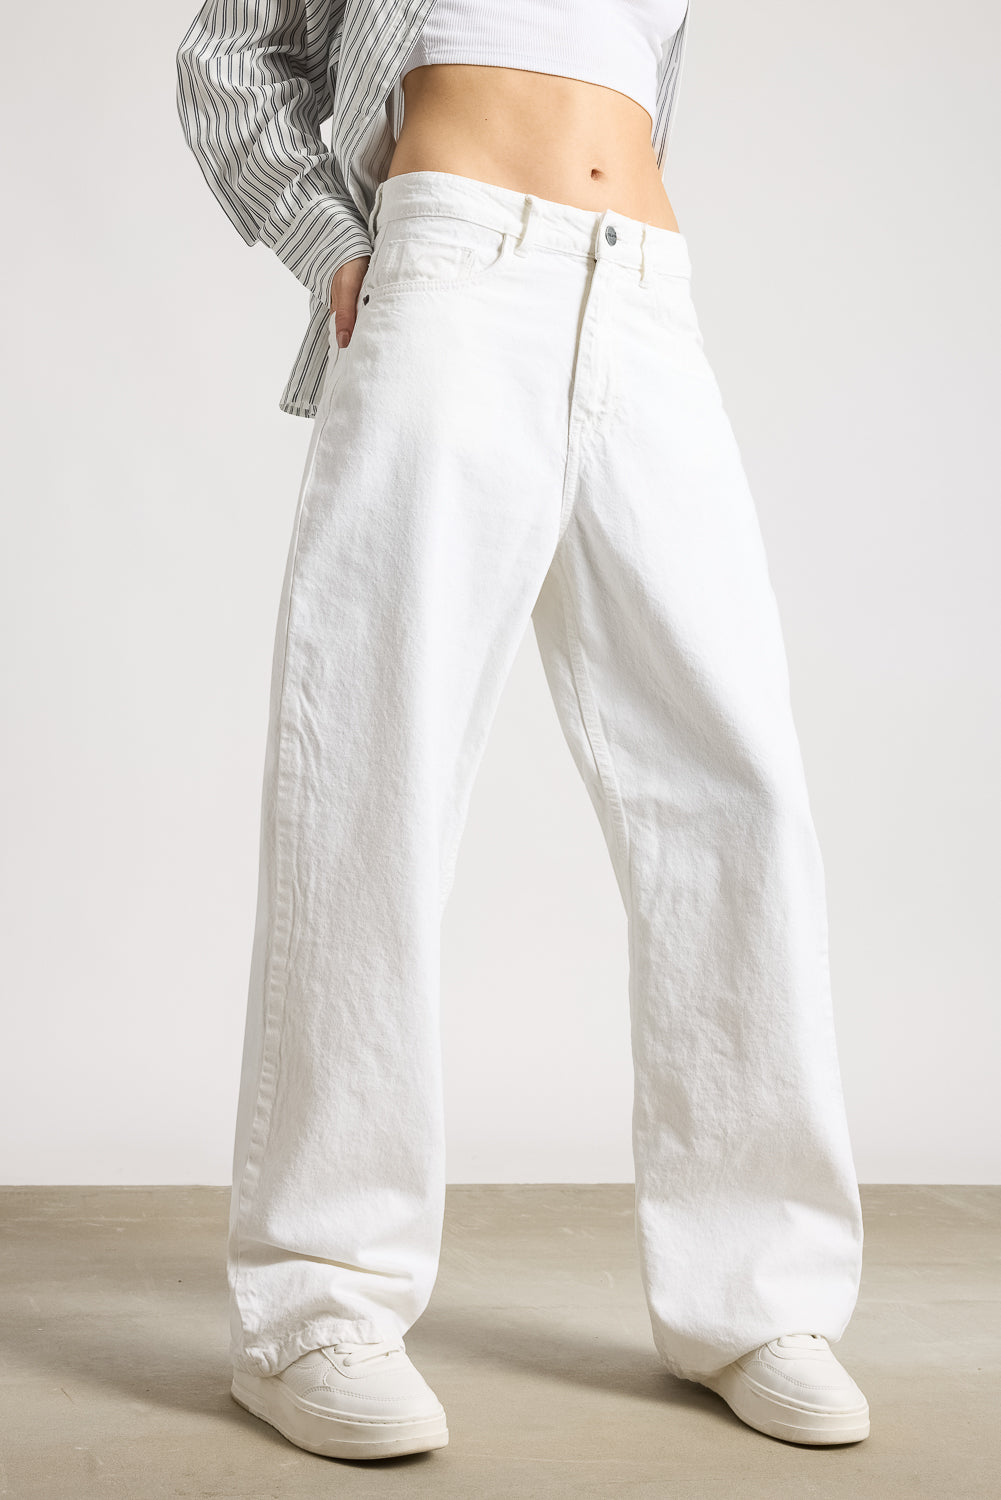 ICONIC WHITE WIDE LEG JEANS